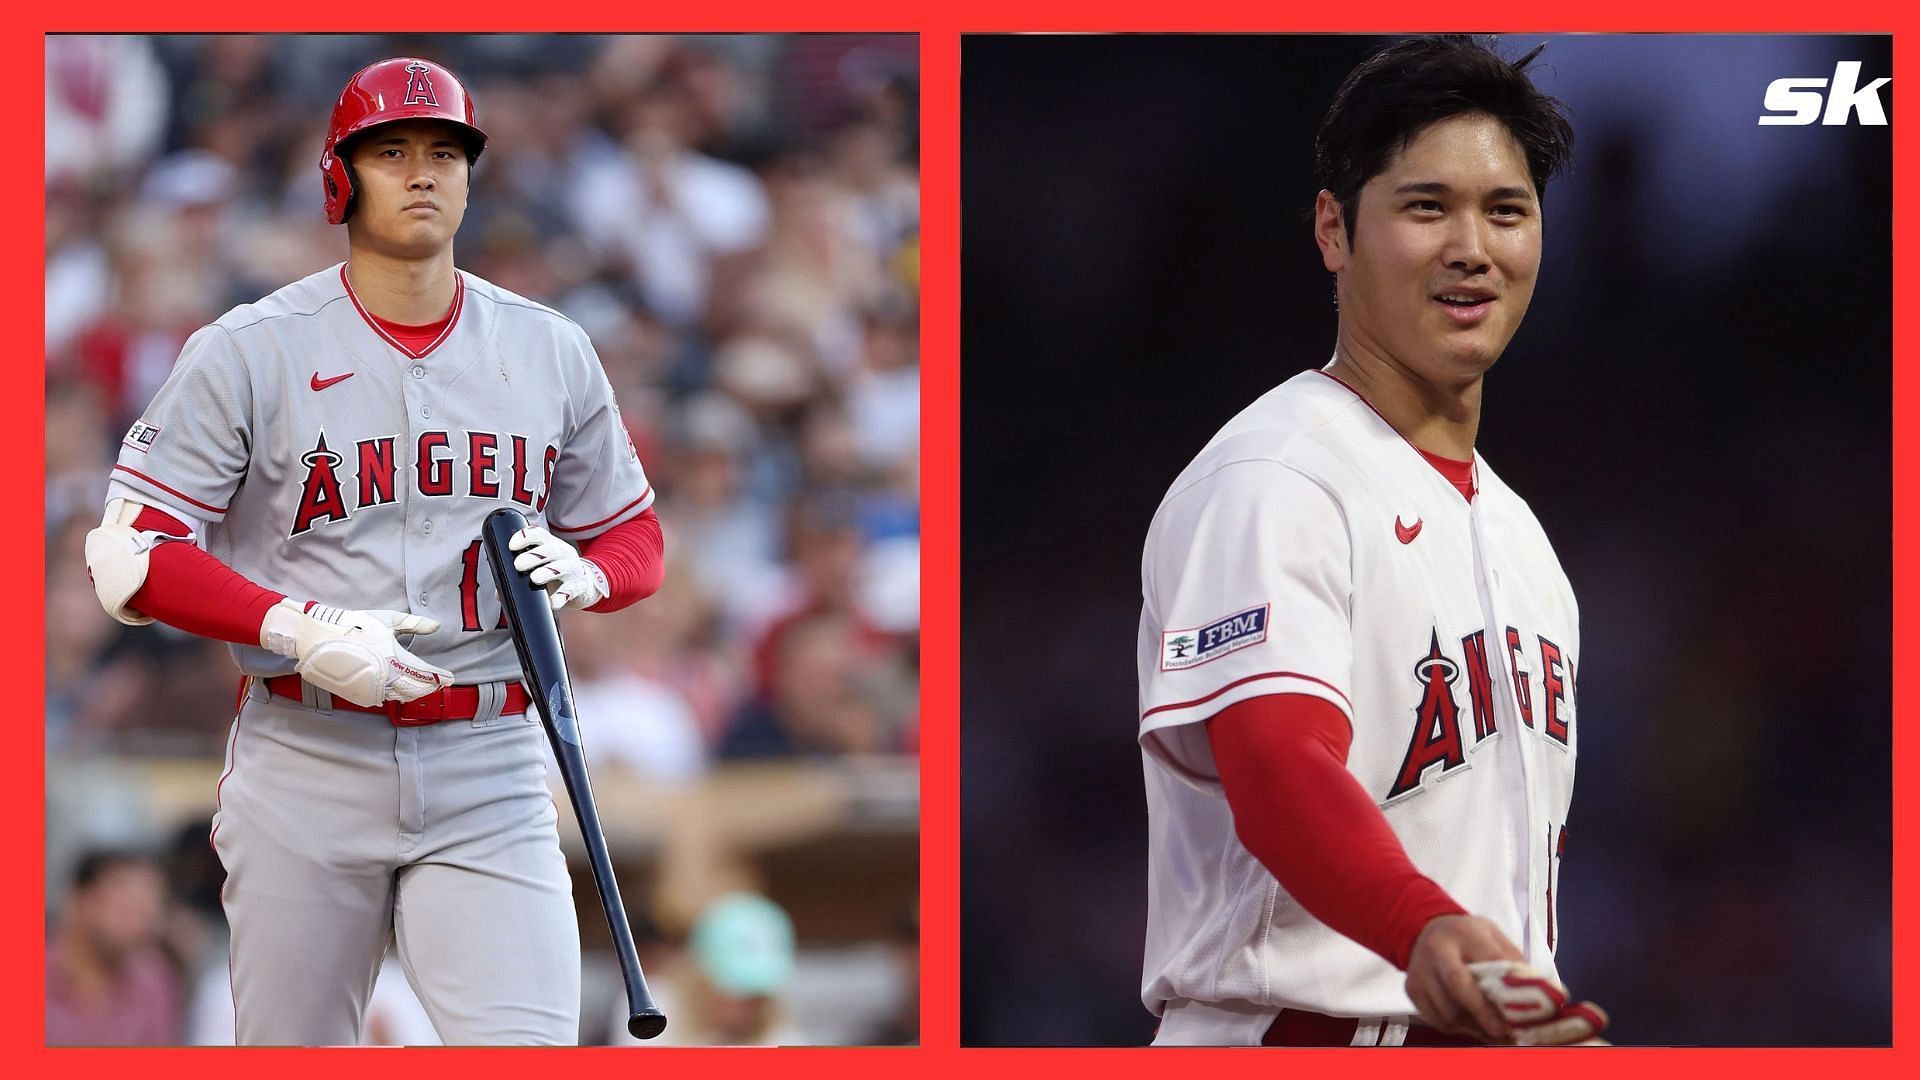 Shohei Ohtani slams his helmet in the dugout after Angels lose vs Pirates